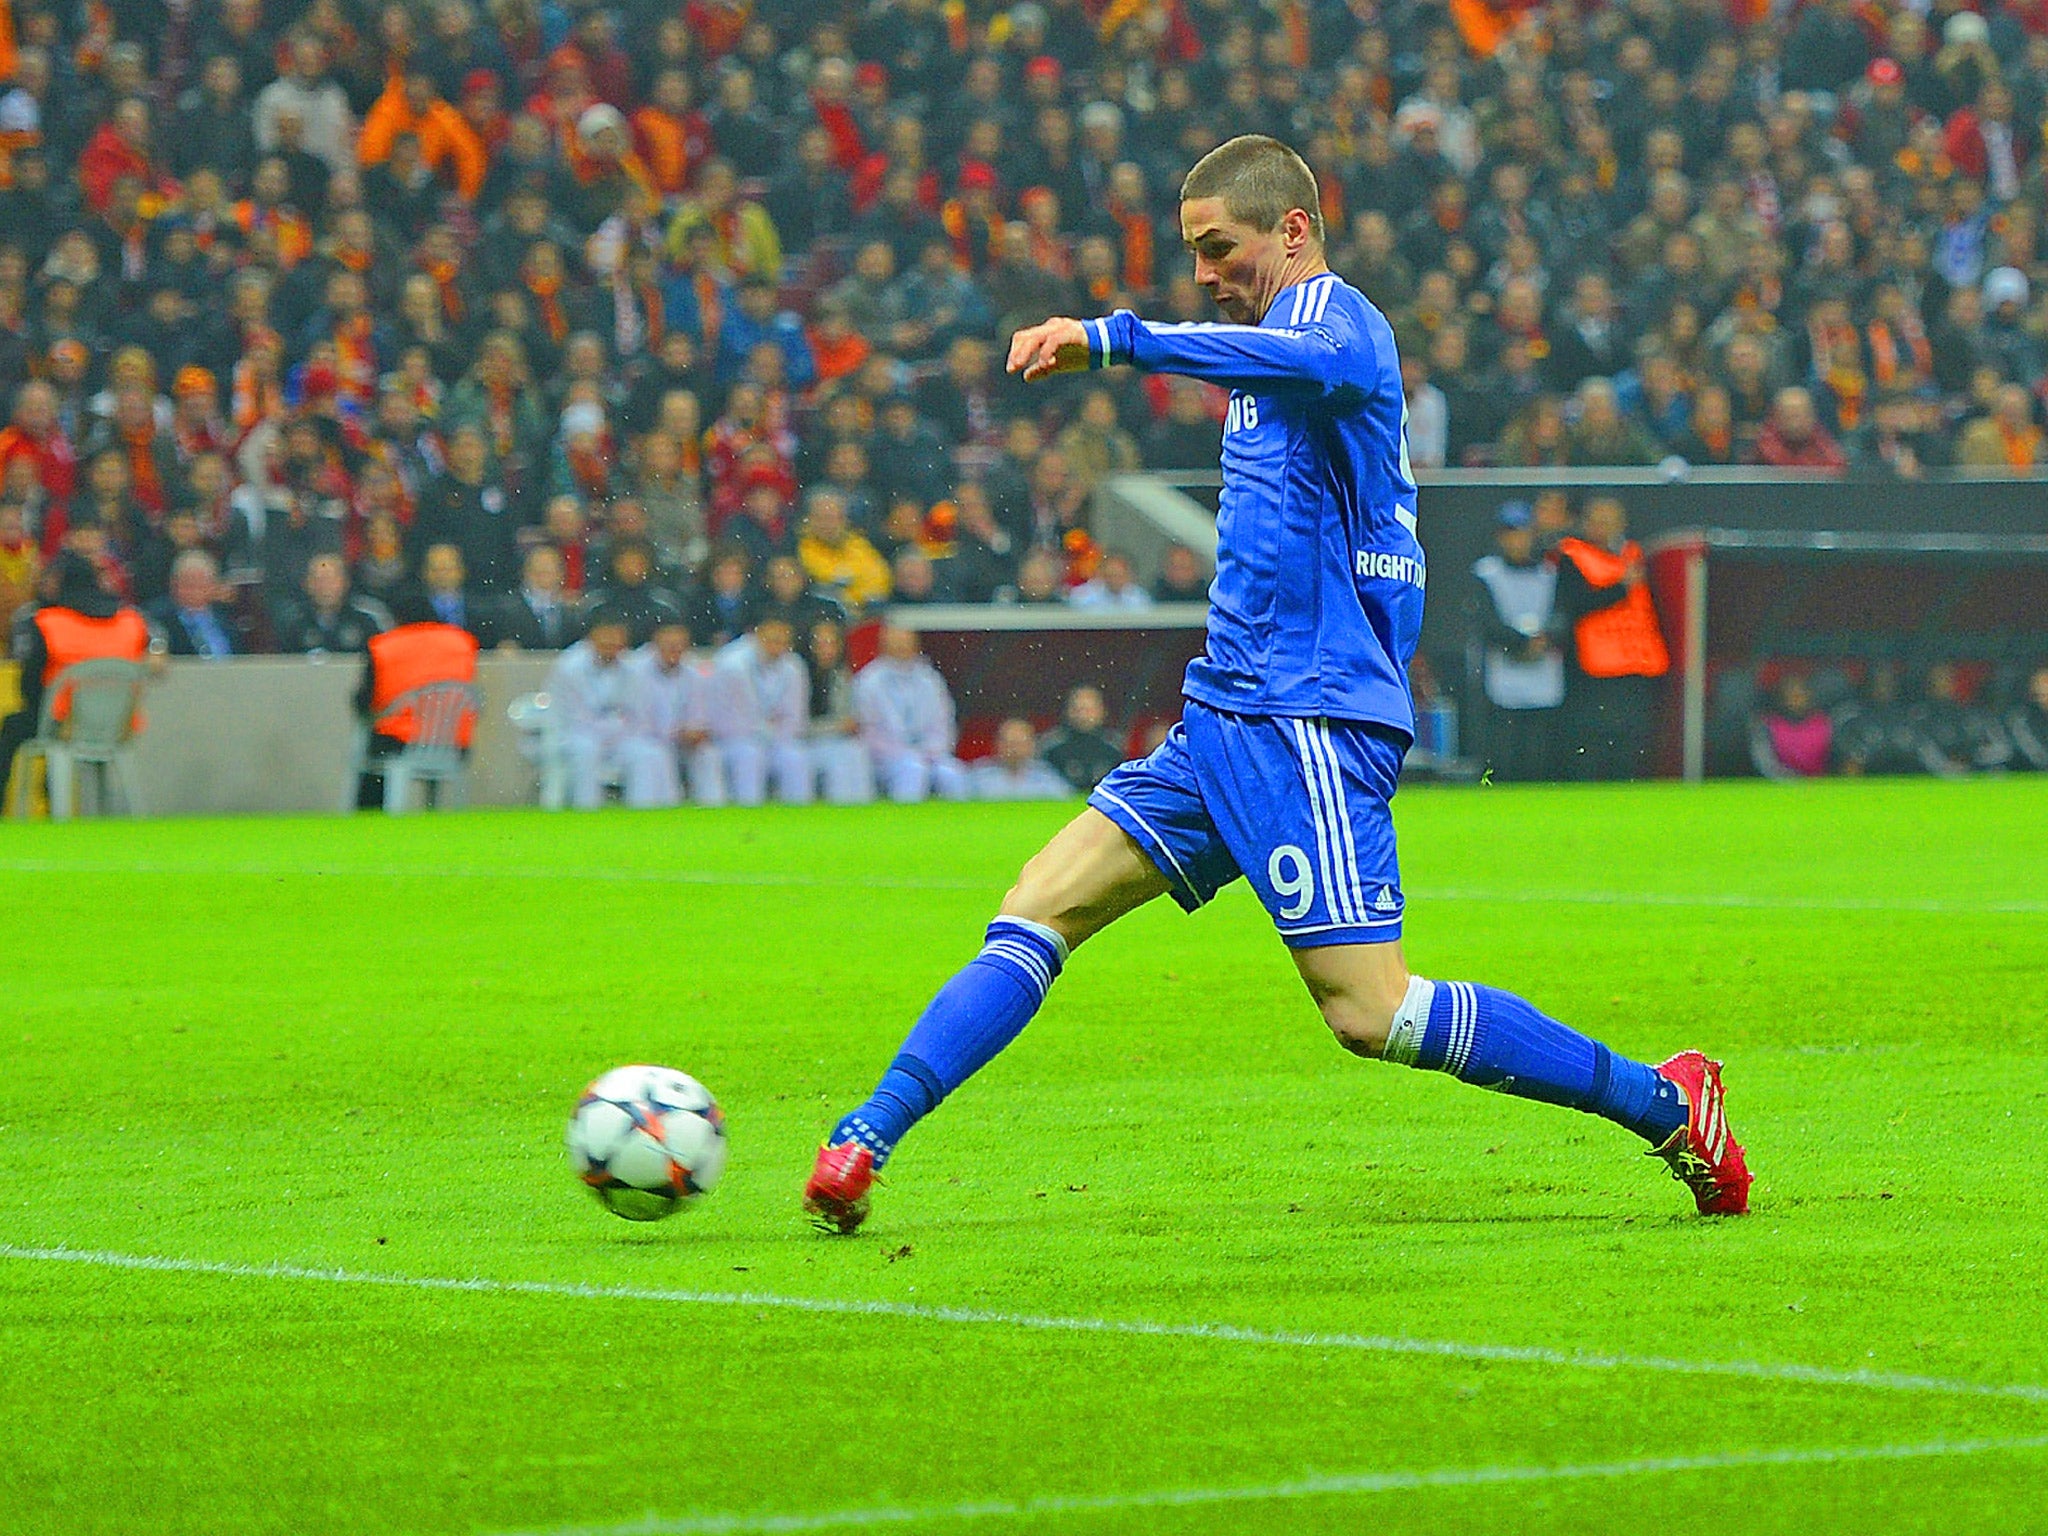 Chelsea escaped Istanbul with a draw and a precious away goal from Torres